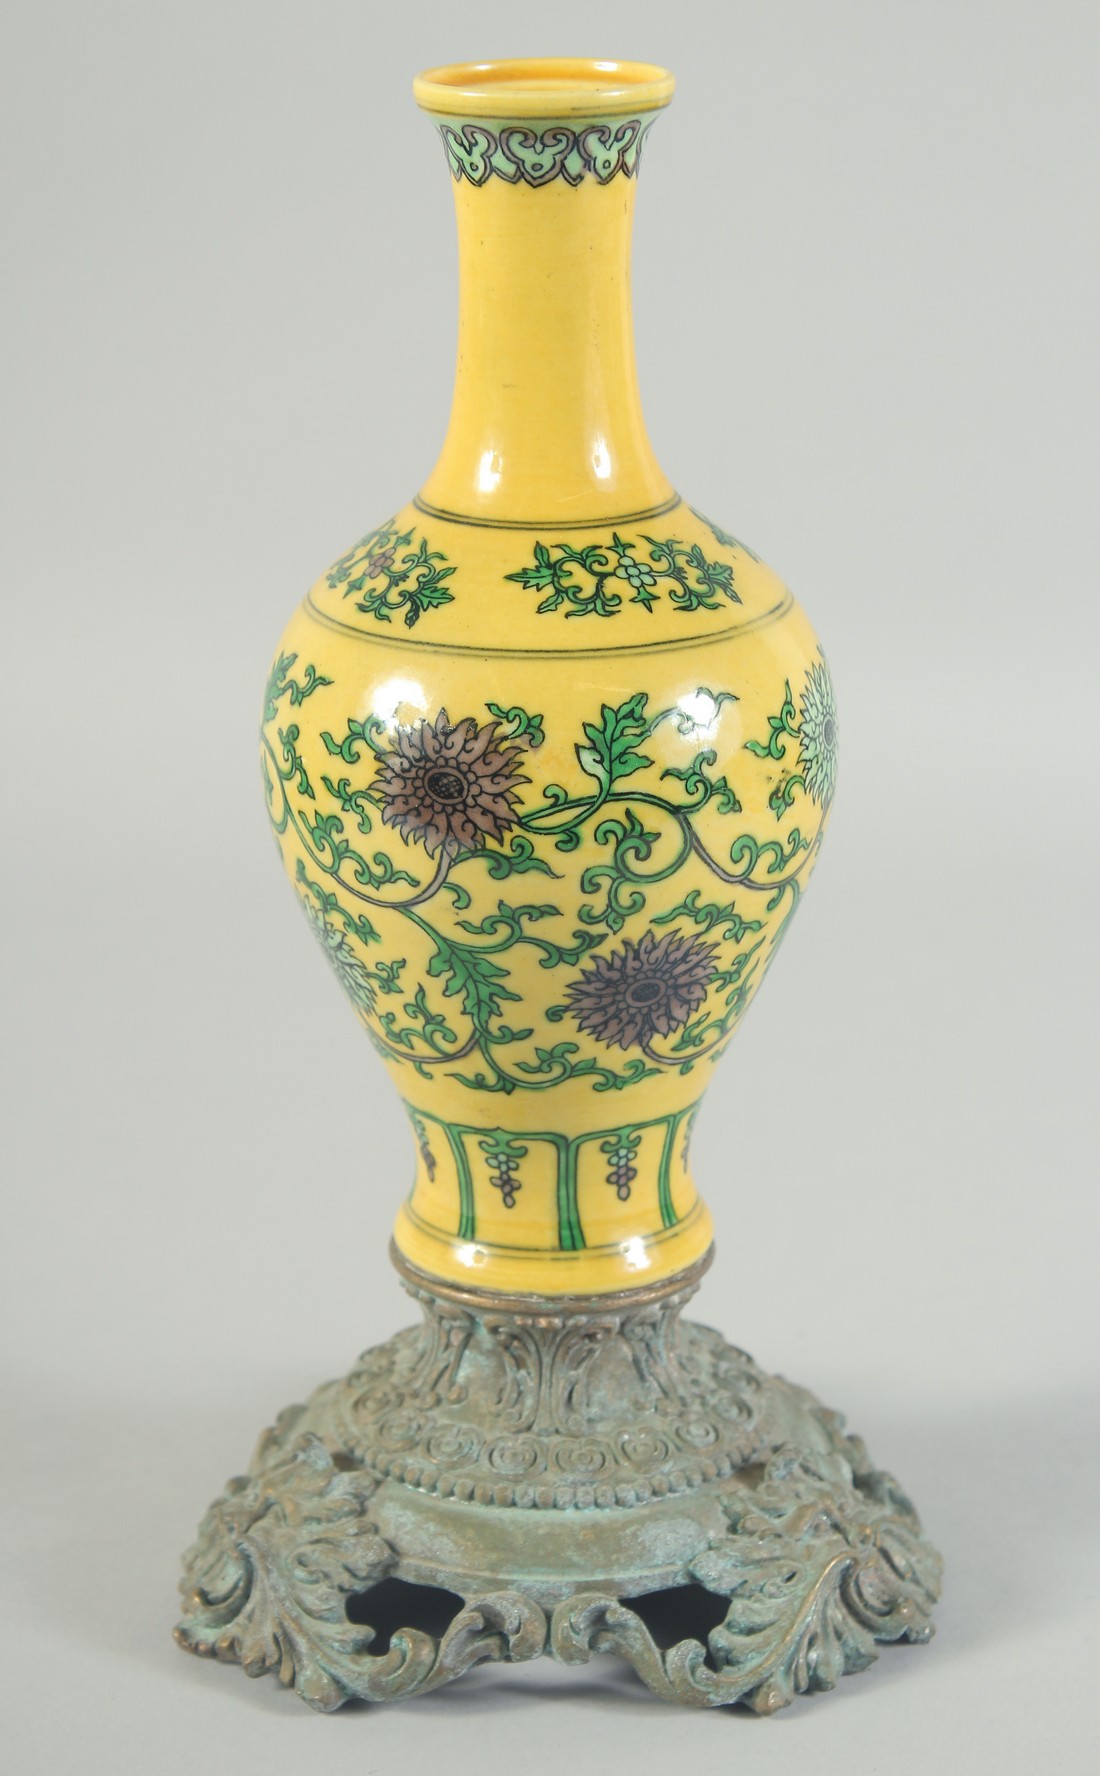 A CHINESE IMPERIAL YELLOW GROUND ENAMEL FLORAL VASE, mounted to a French bronze stand, vase base